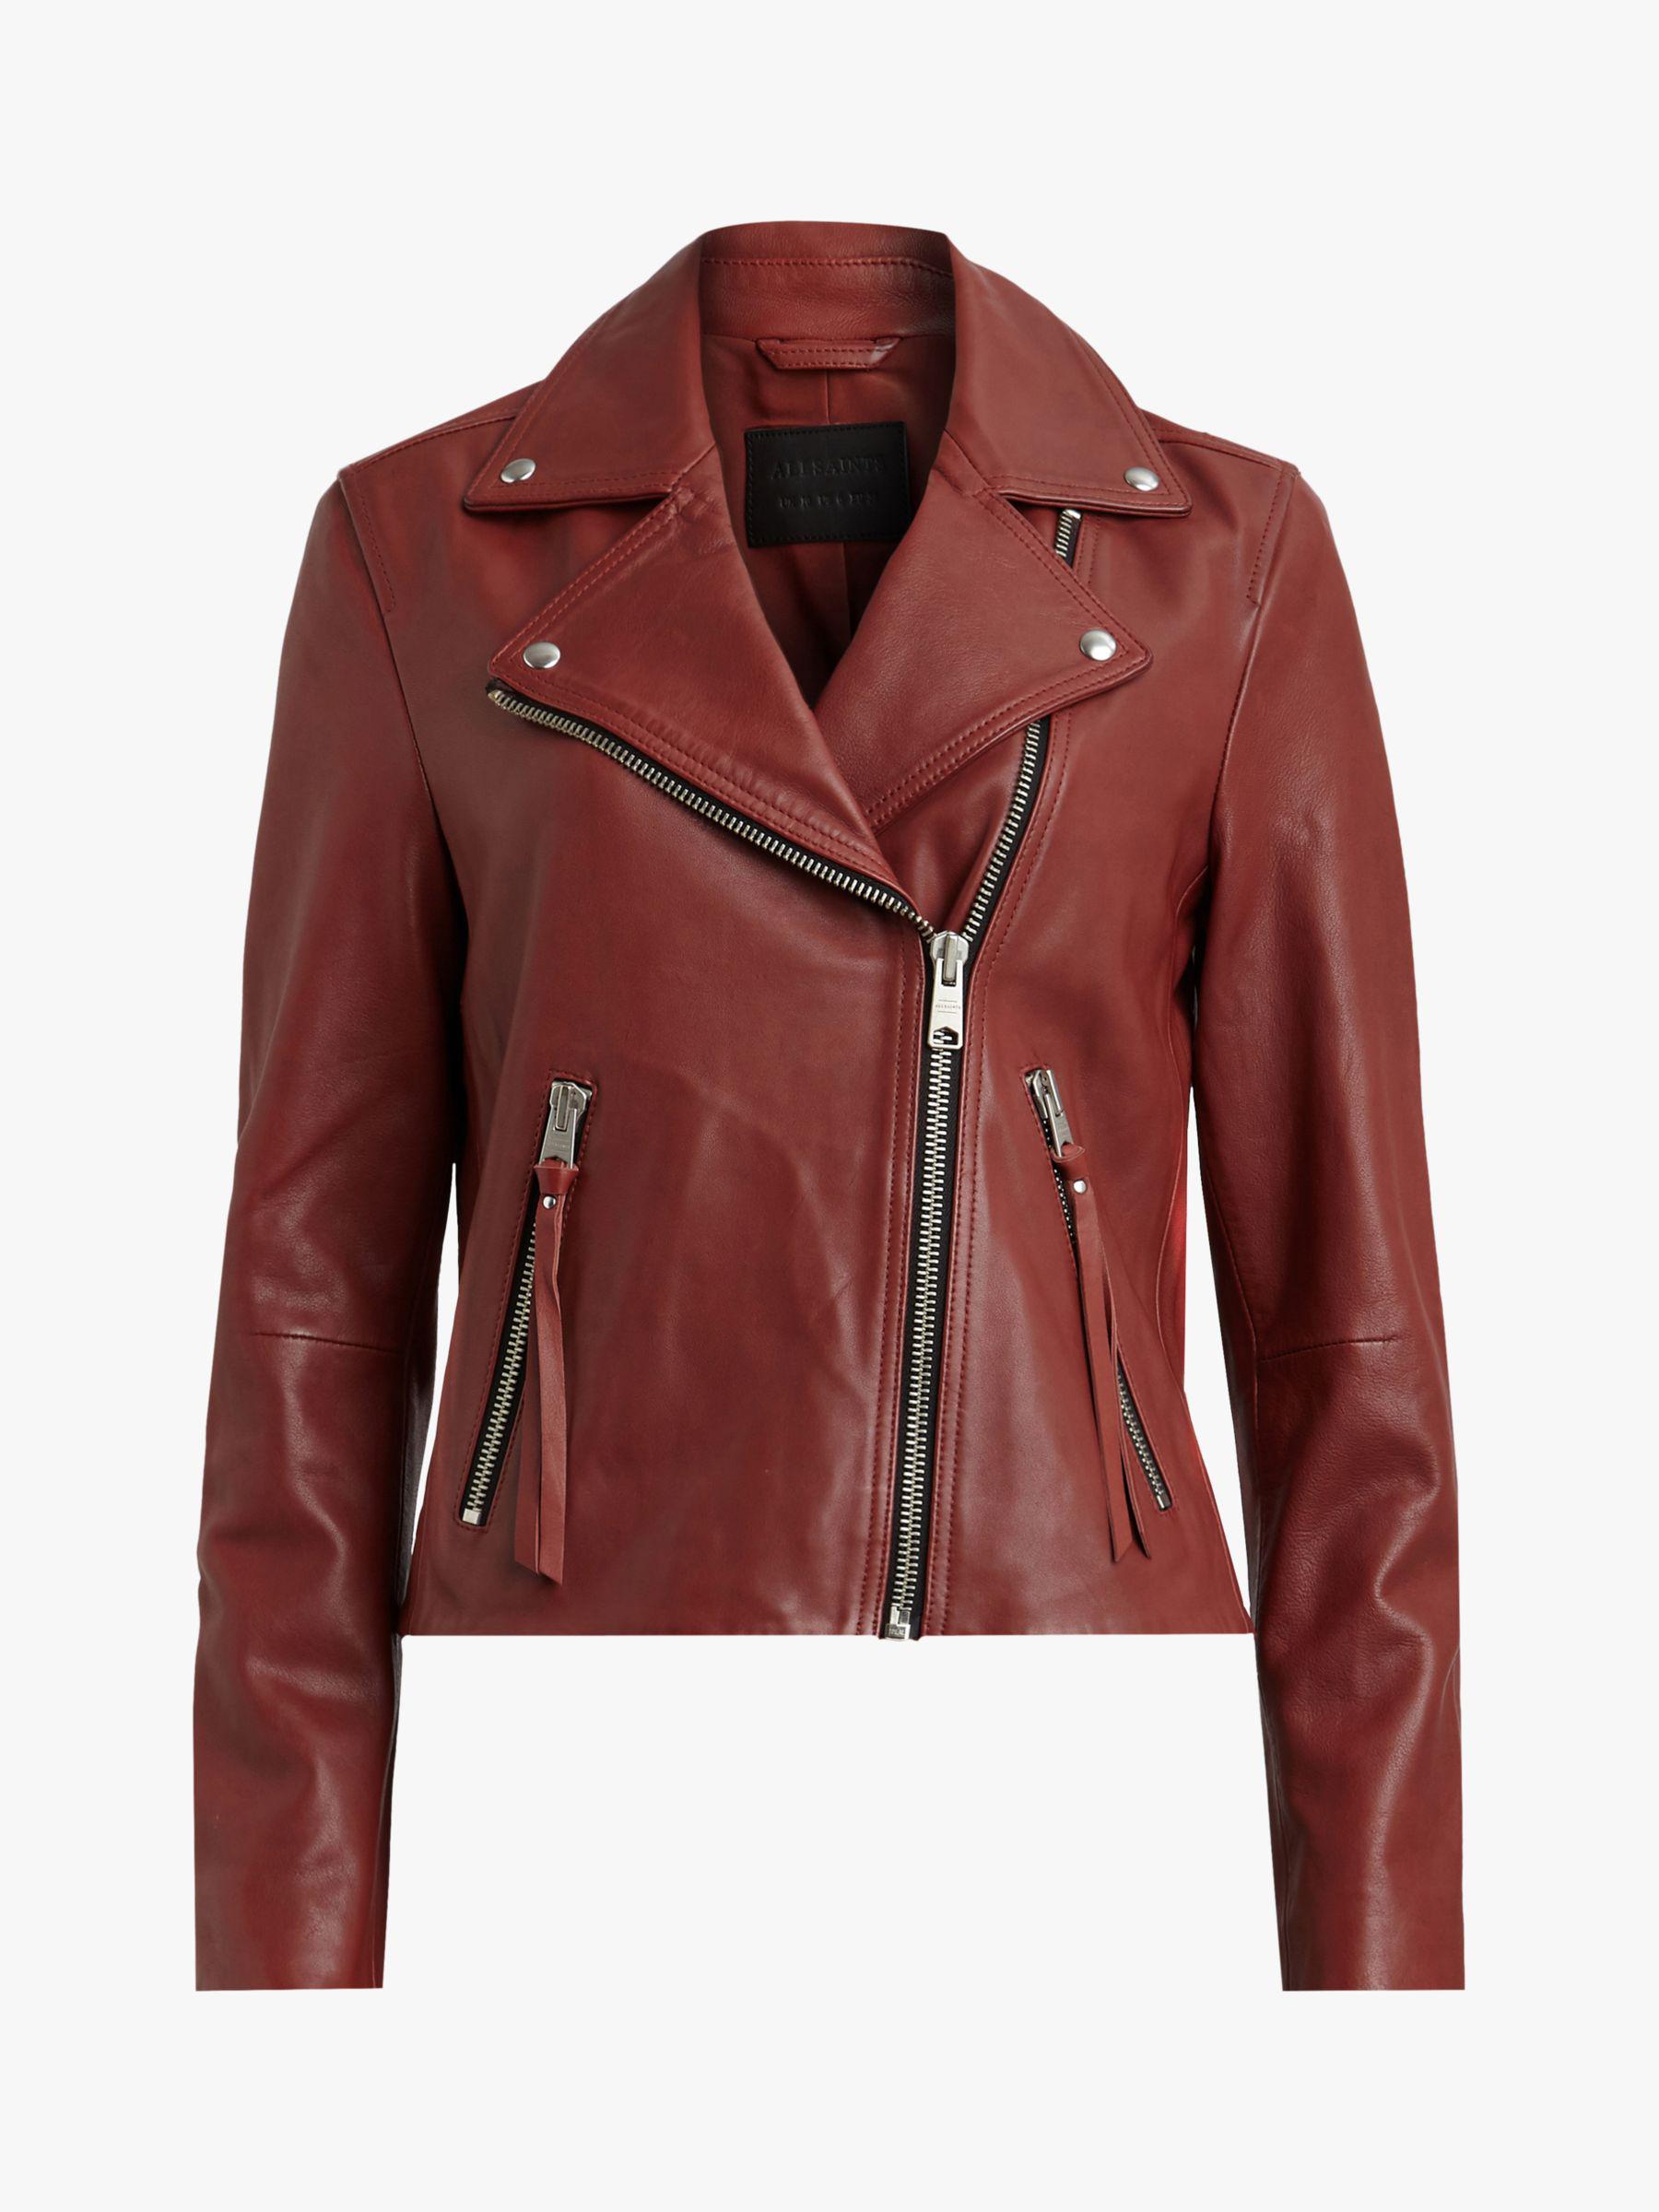 AllSaints Leather Dalby Biker Jacket in Brick Red (Red) - Lyst